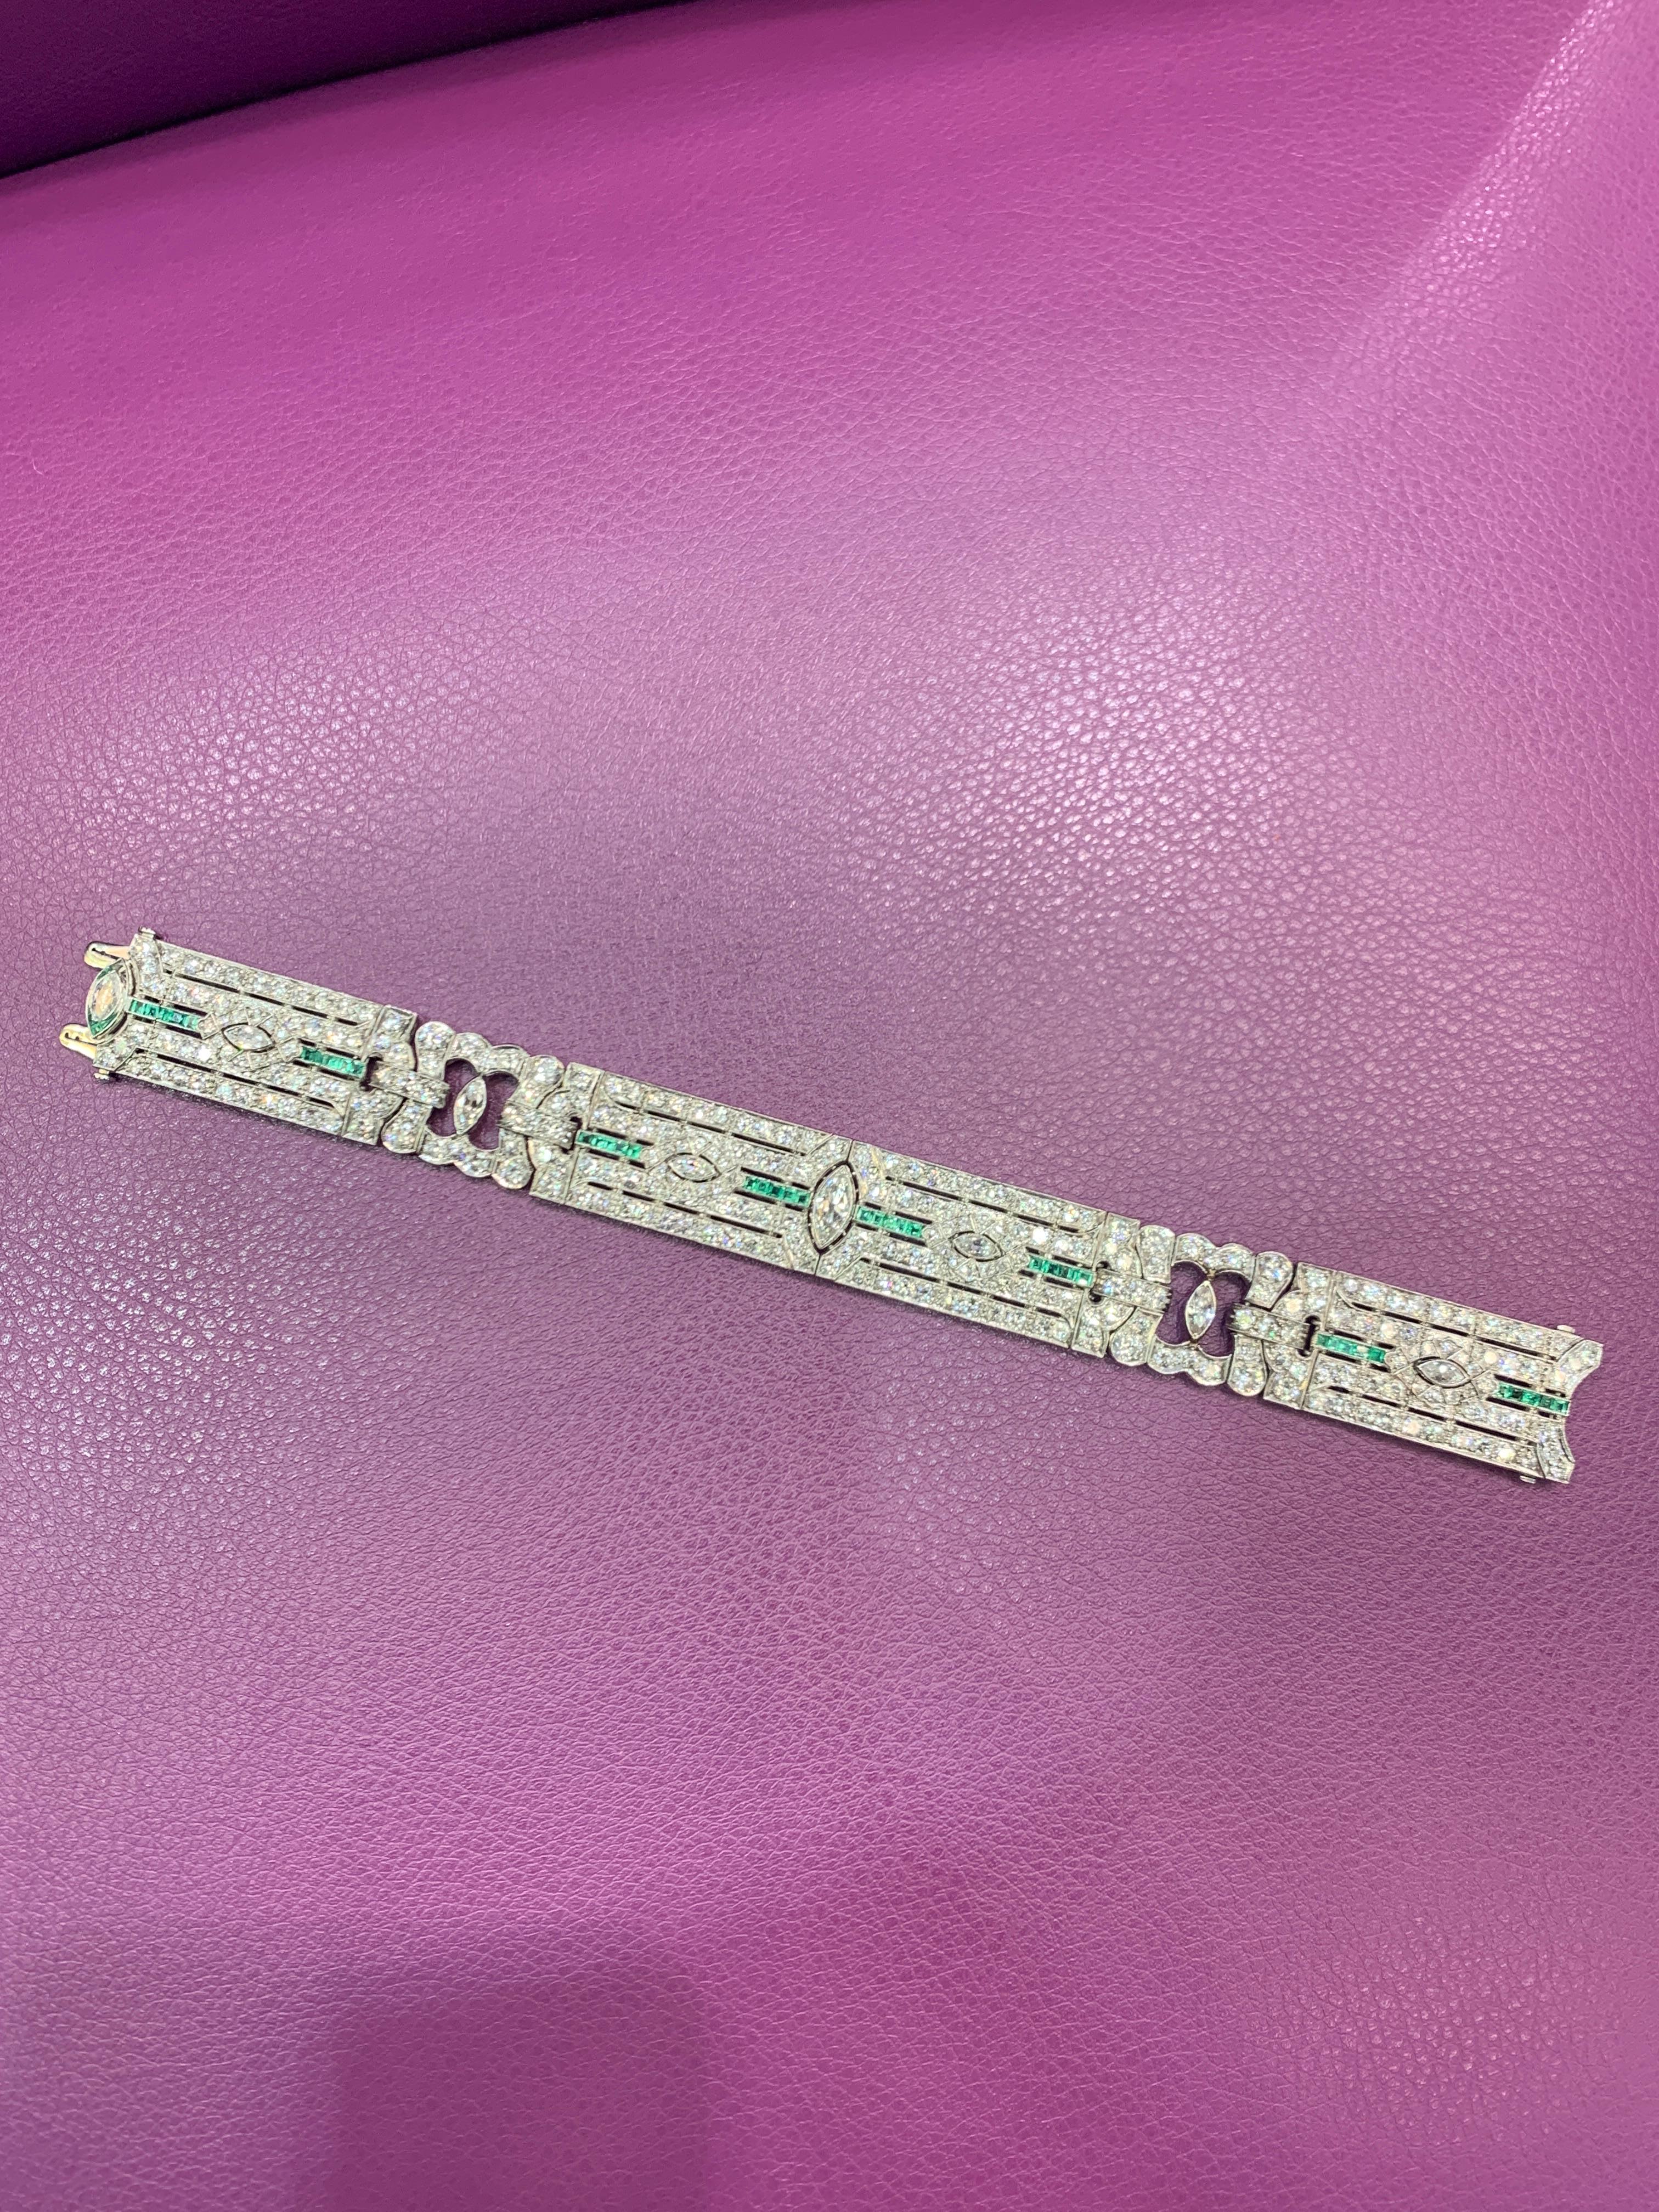 Emerald And Diamond Bracelet 
Platinum
Marquise diamond Weight: 1.97 Cts 
Round diamond Weight: 14.42 Cts
Green Emerald Weight: 2.00 Cts
Length: 7 In
Made circa 1920